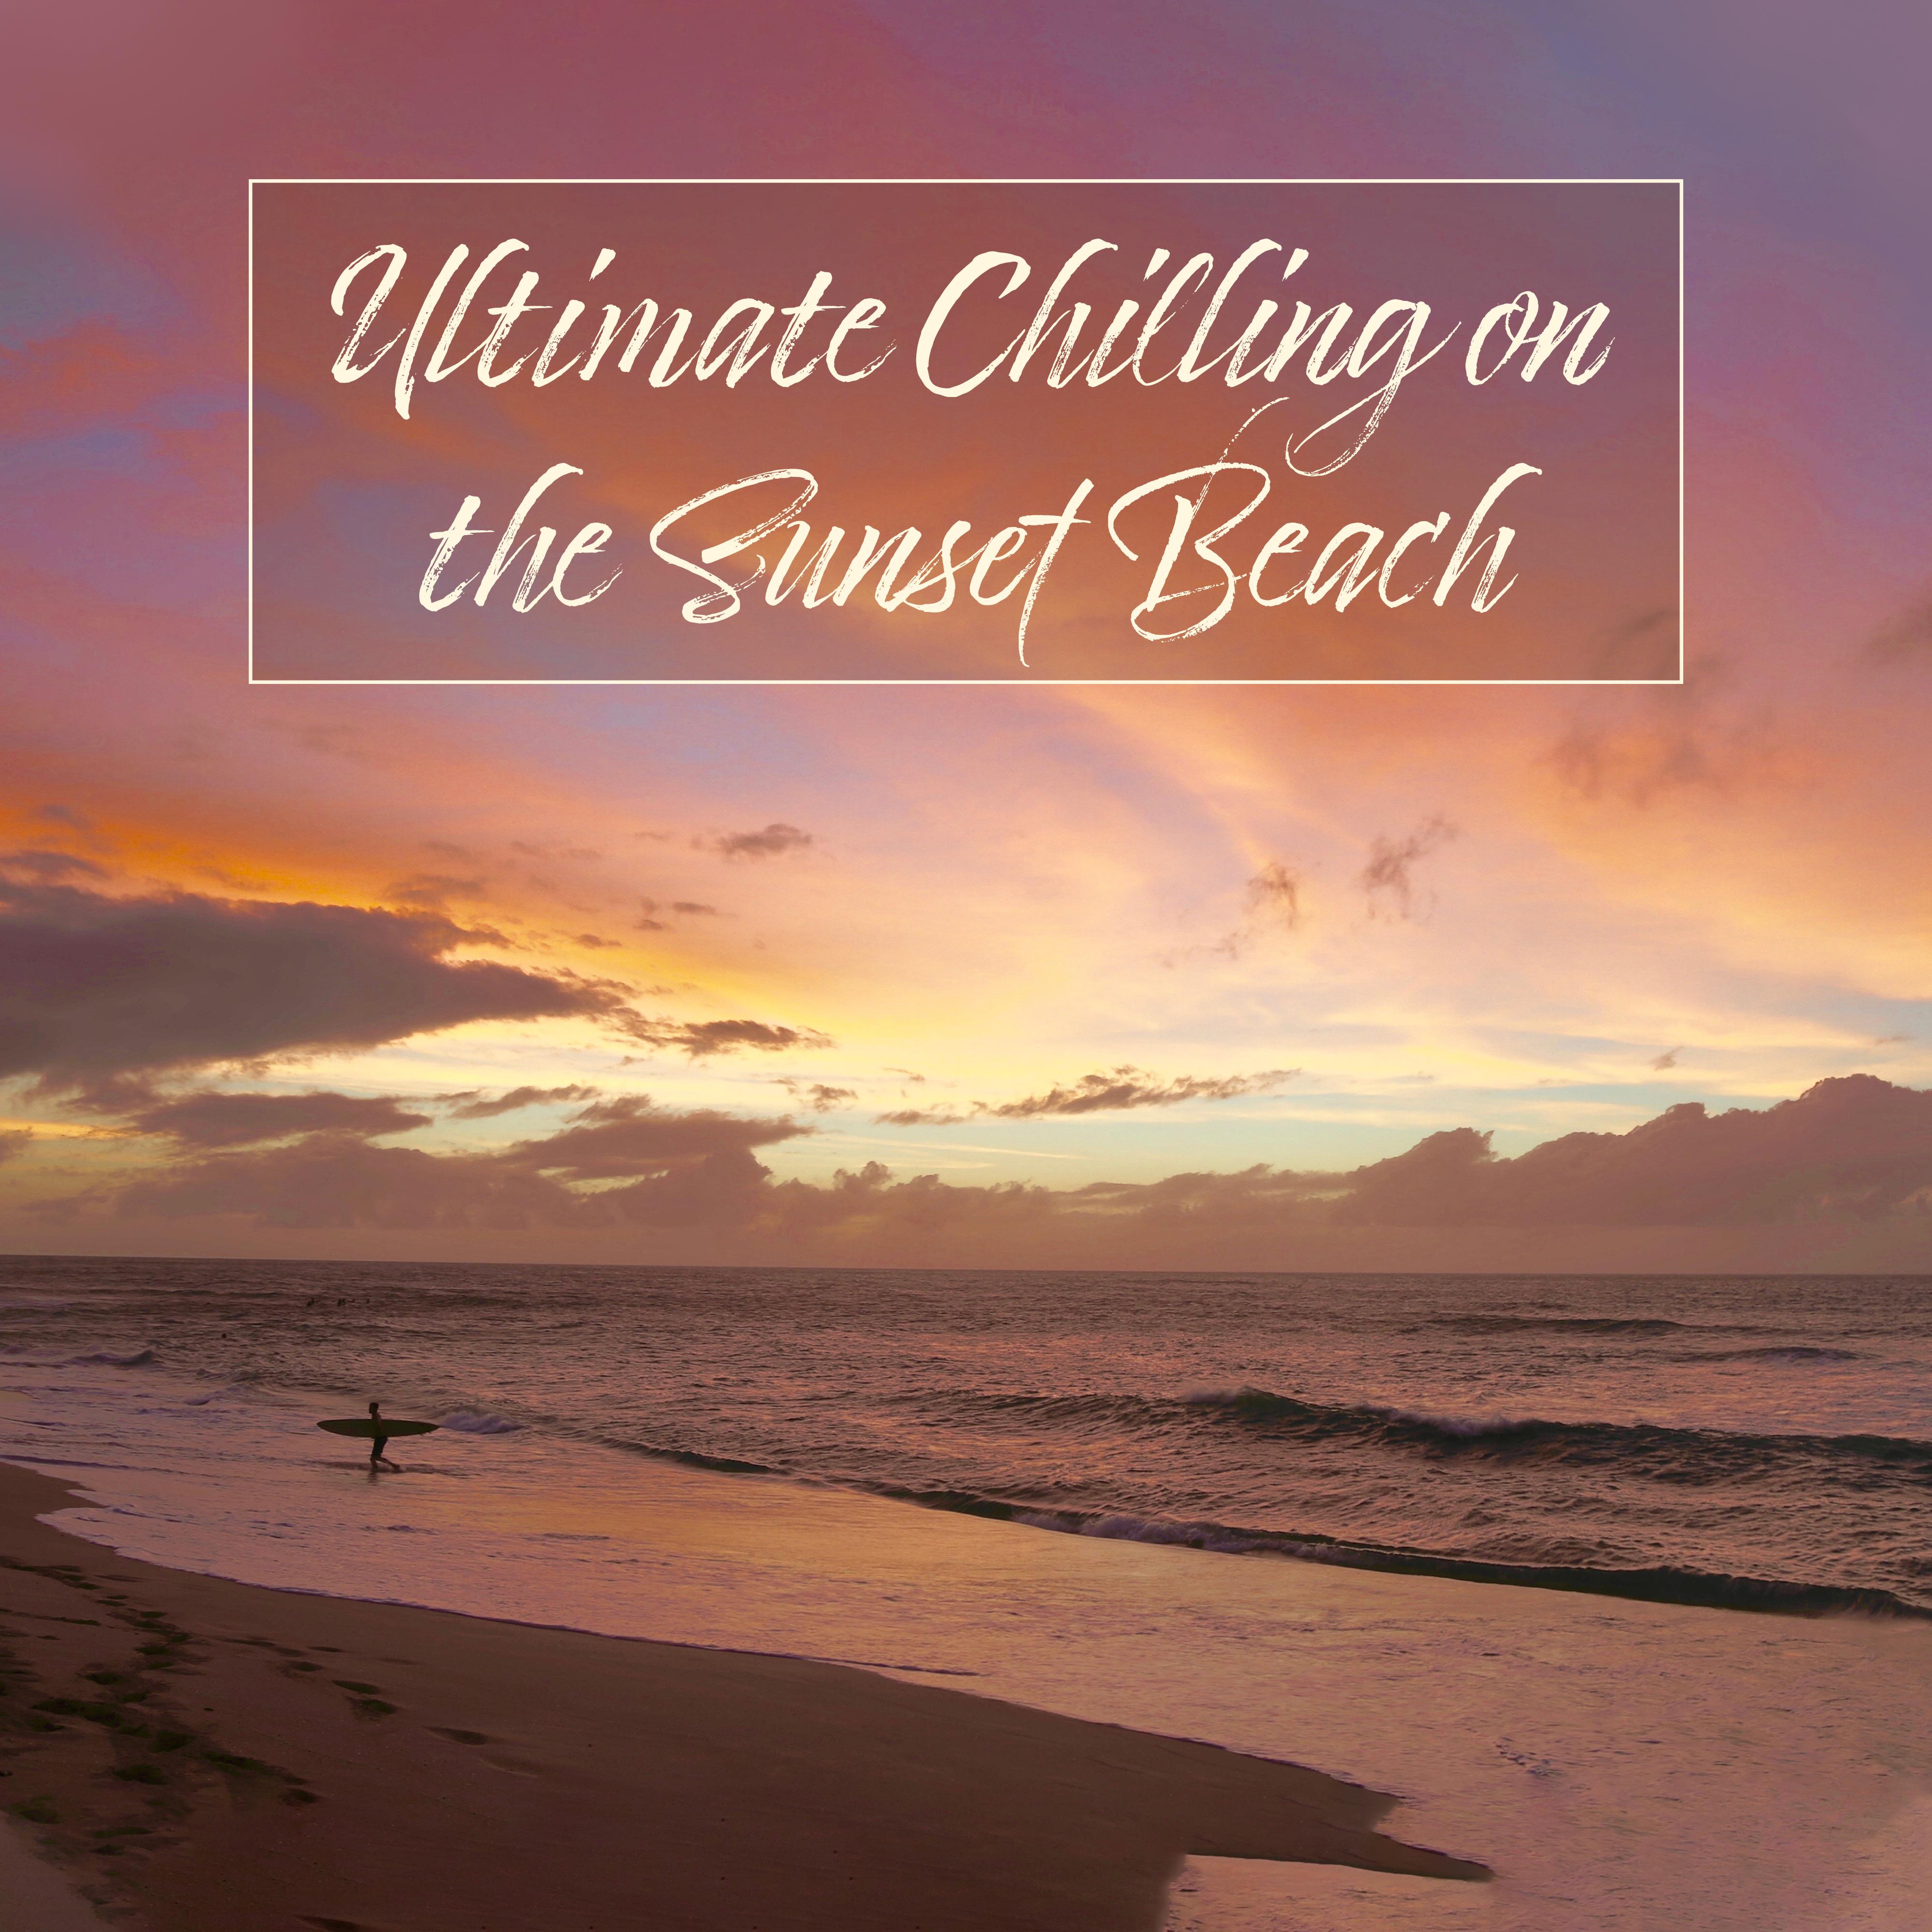 Ultimate Chilling on the Sunset Beach: 2019 Chillout Music for Total Relaxation, Soft Vibes for Spending Time on the Beach, Calming Down, Stress Relief Melodies